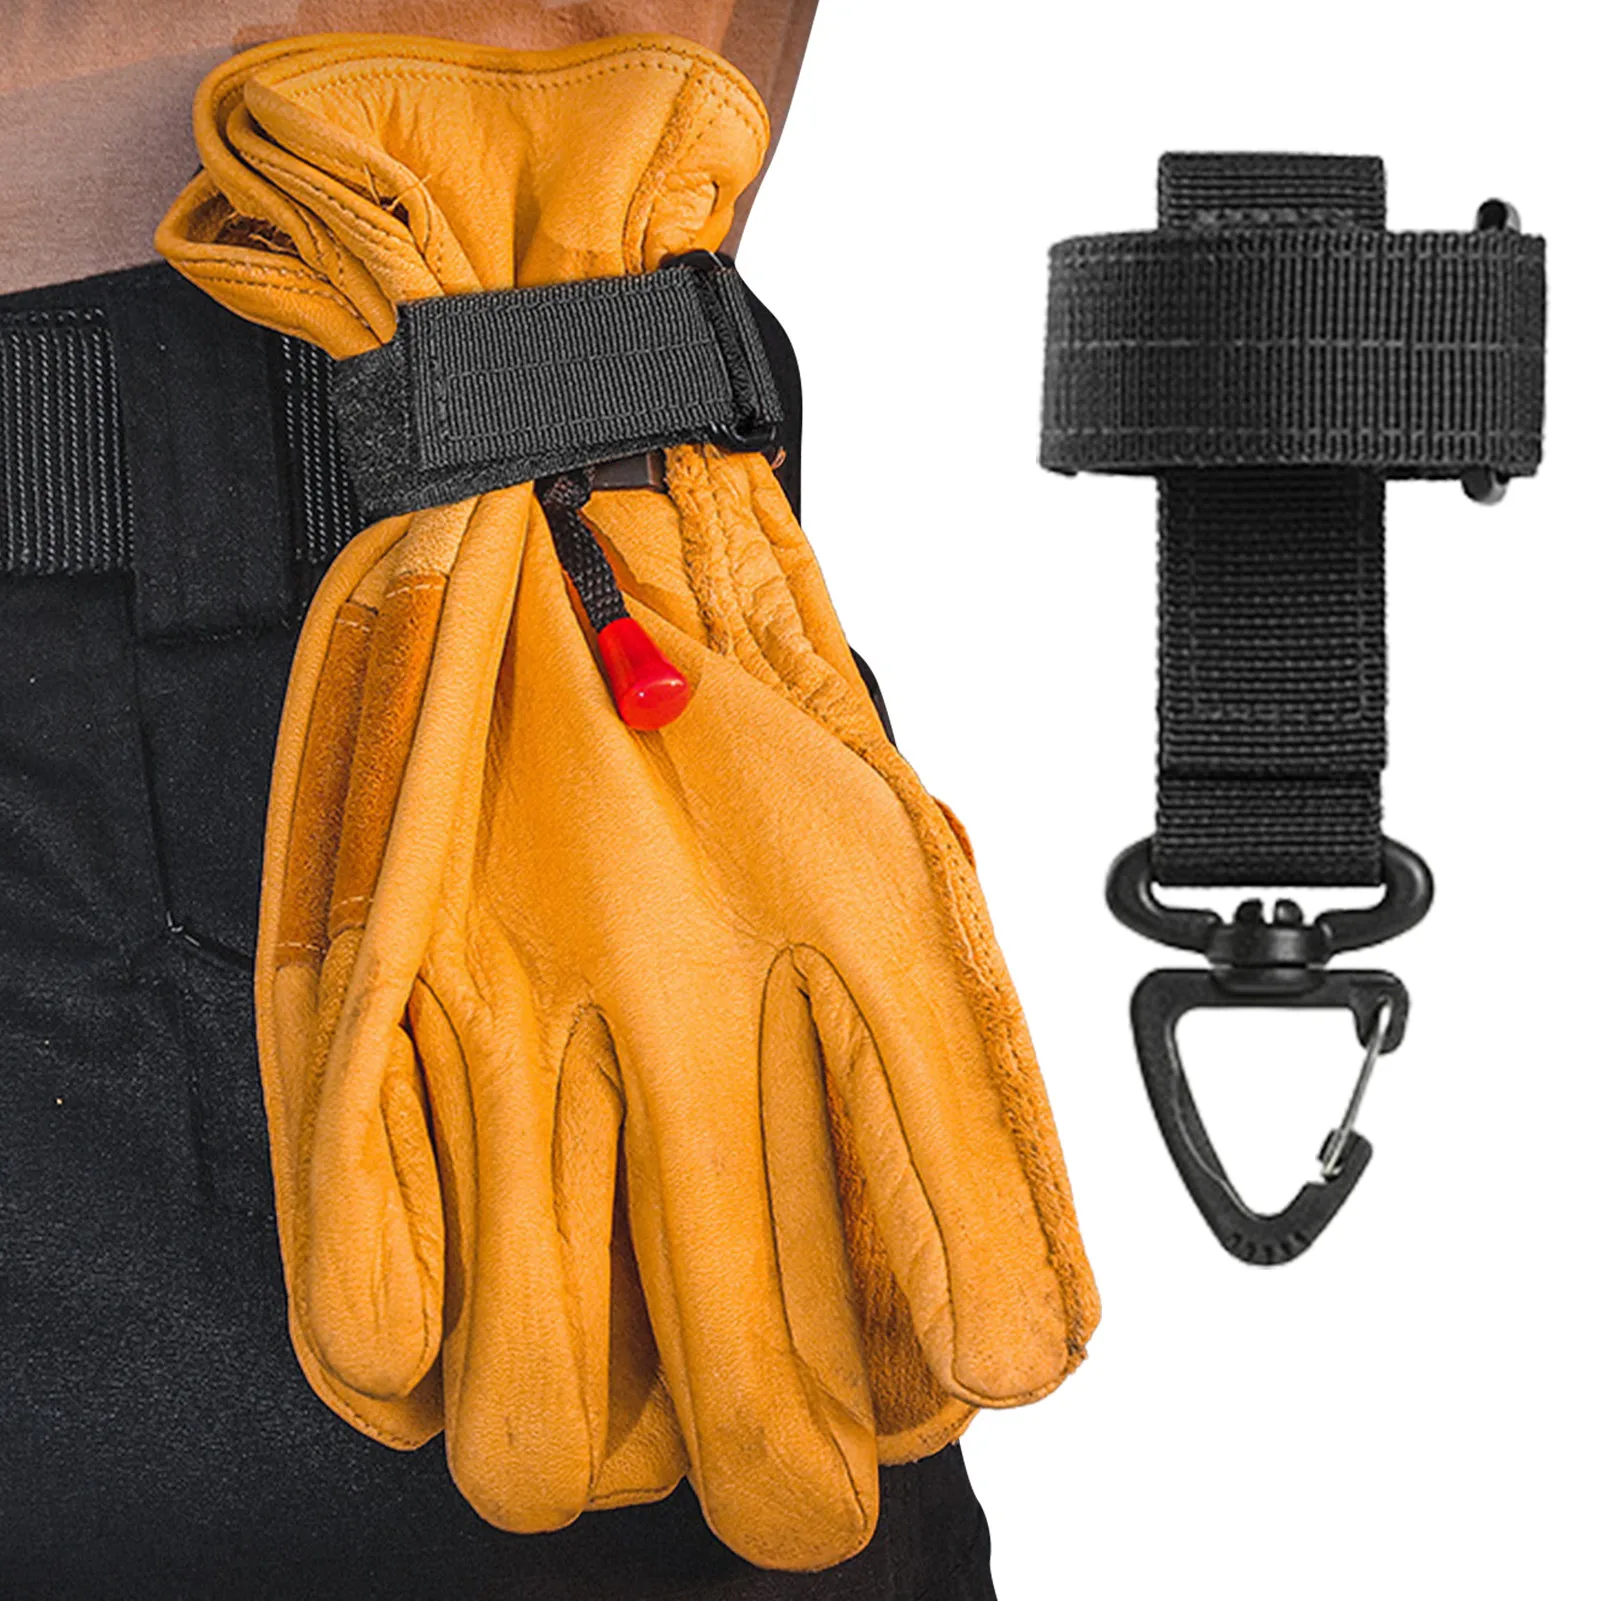 

Glove Clips For Work Adjustable Glove Holder Clip Glove Clips For Construction With Hook Emergency Firefighting Rescue Turnout